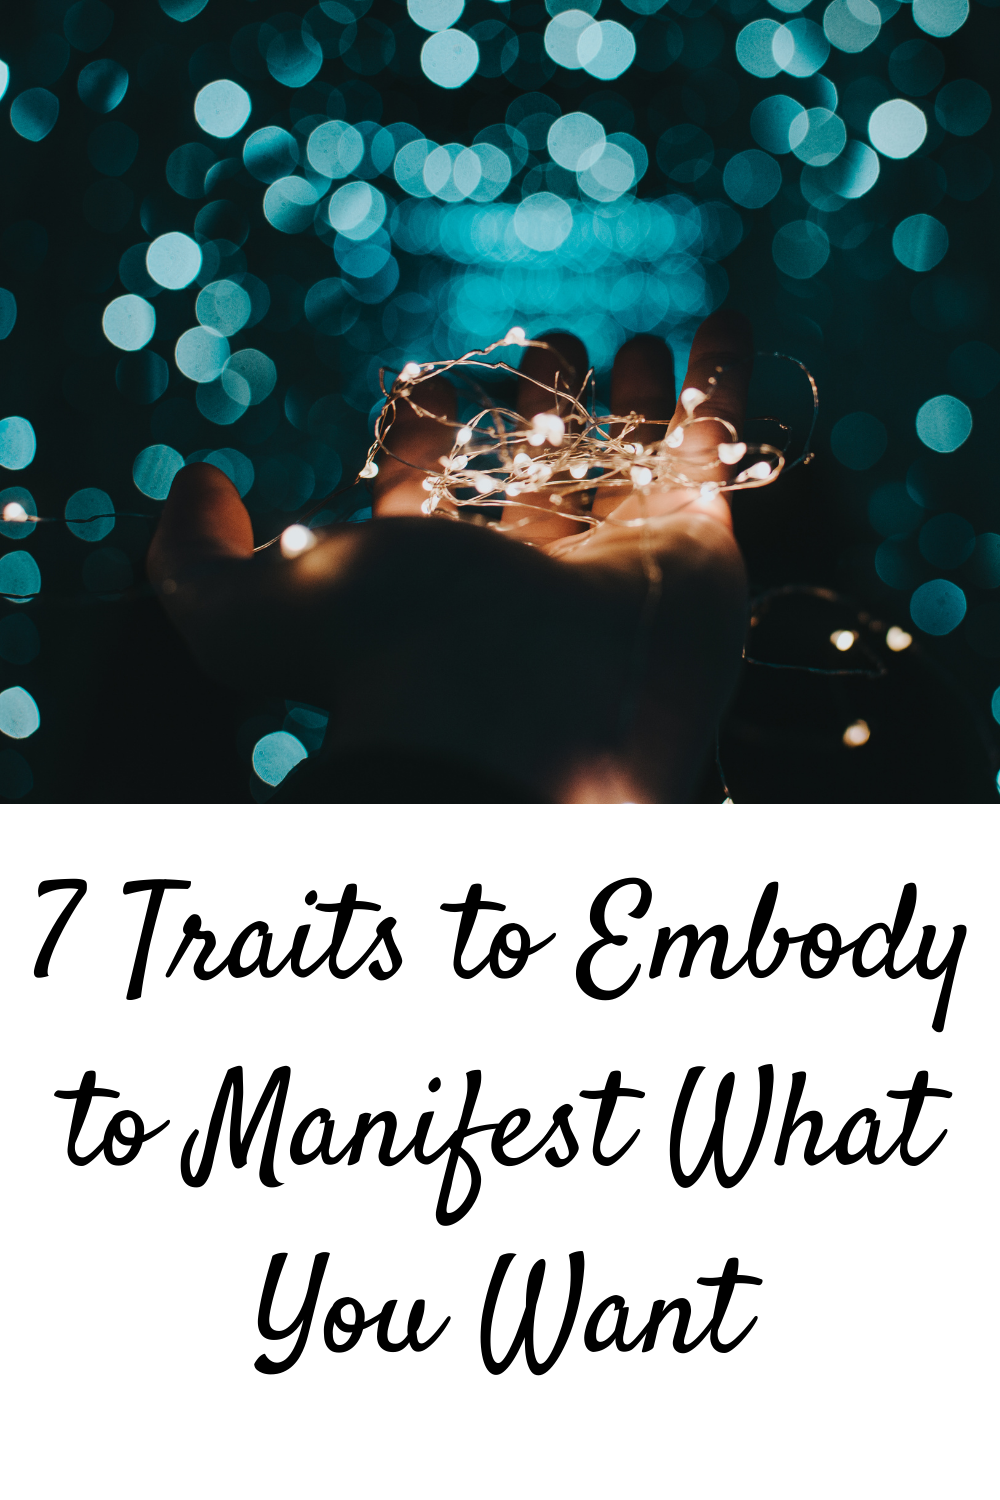 7 Traits to Embody to Manifest What You Want